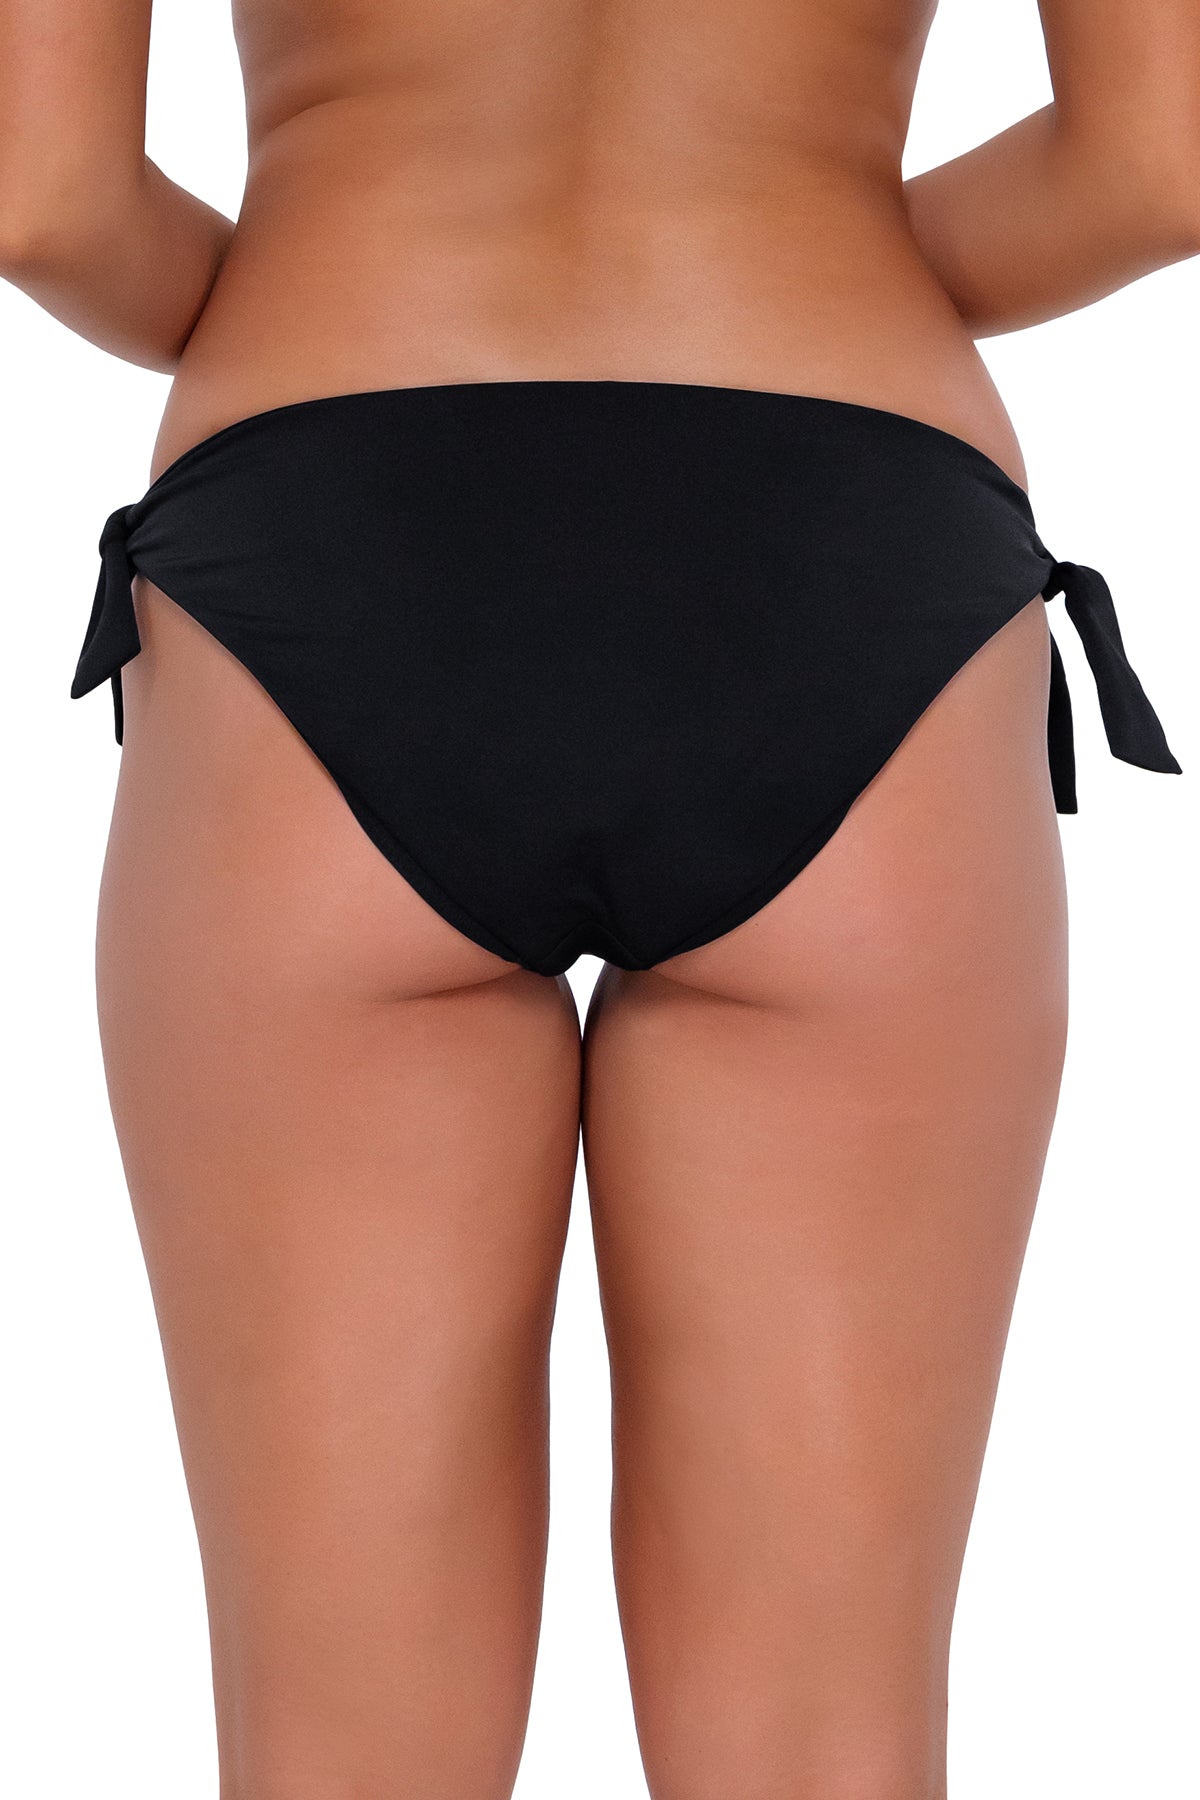 Back pose #1 of Taylor wearing Sunsets Black Lula Reversible Hipster Bottom with side ties